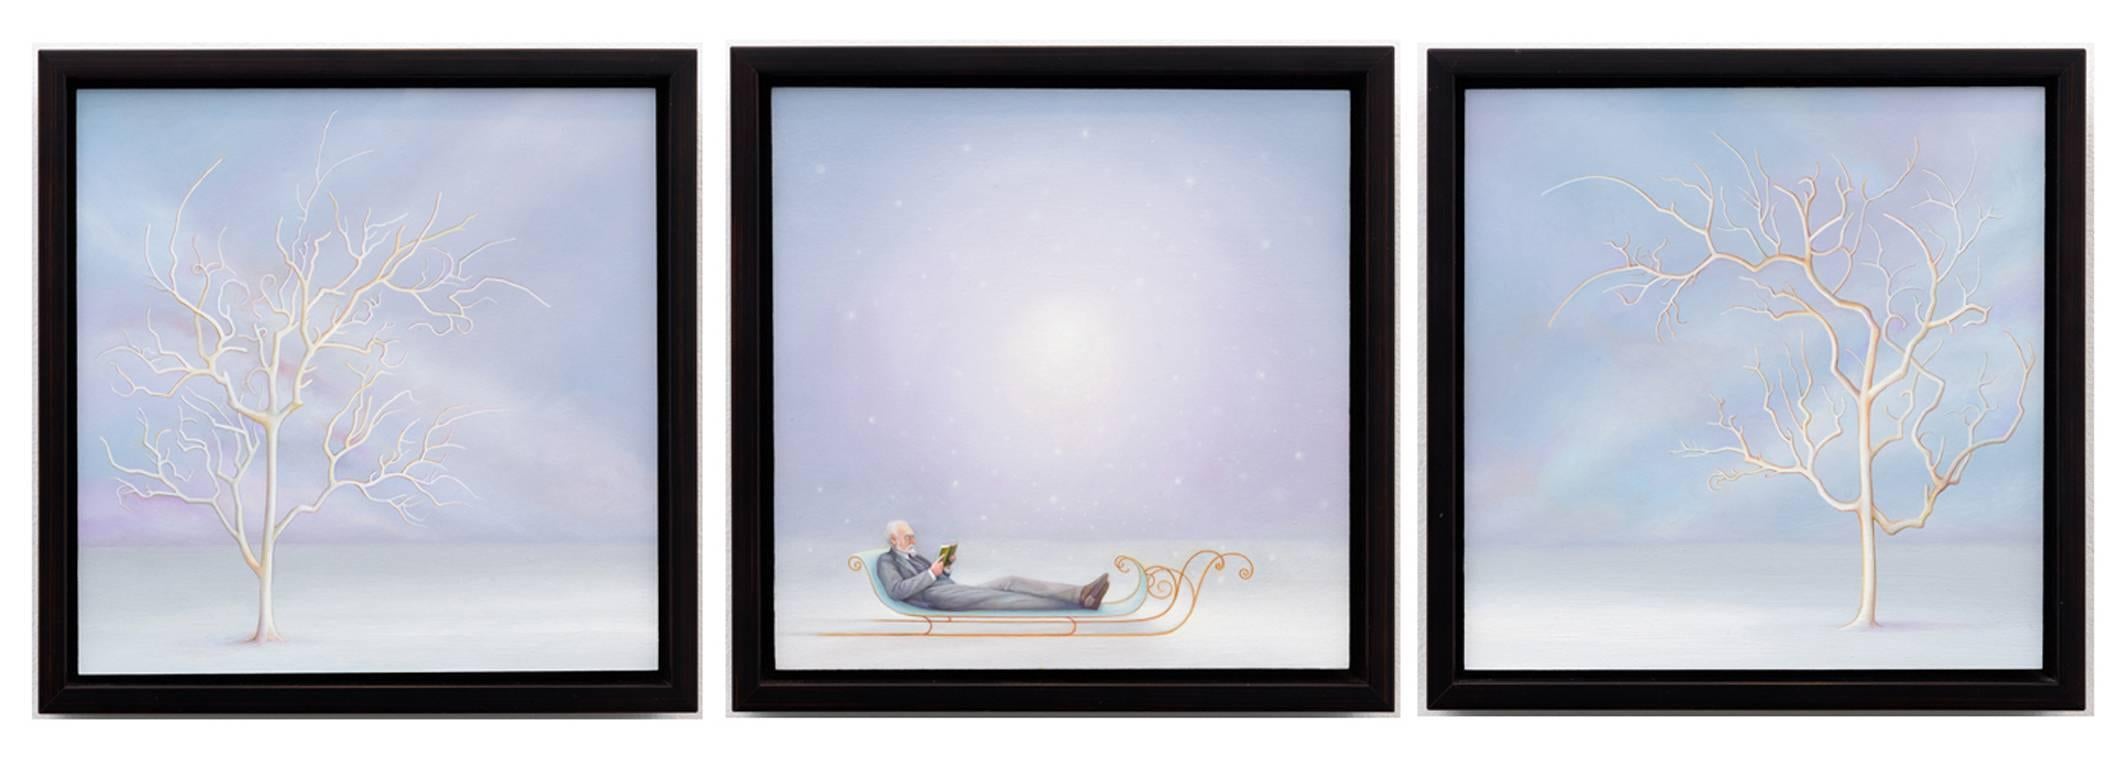 Laura Lasworth Figurative Painting - The Snowfall is so Silent, oil painting (triptych)